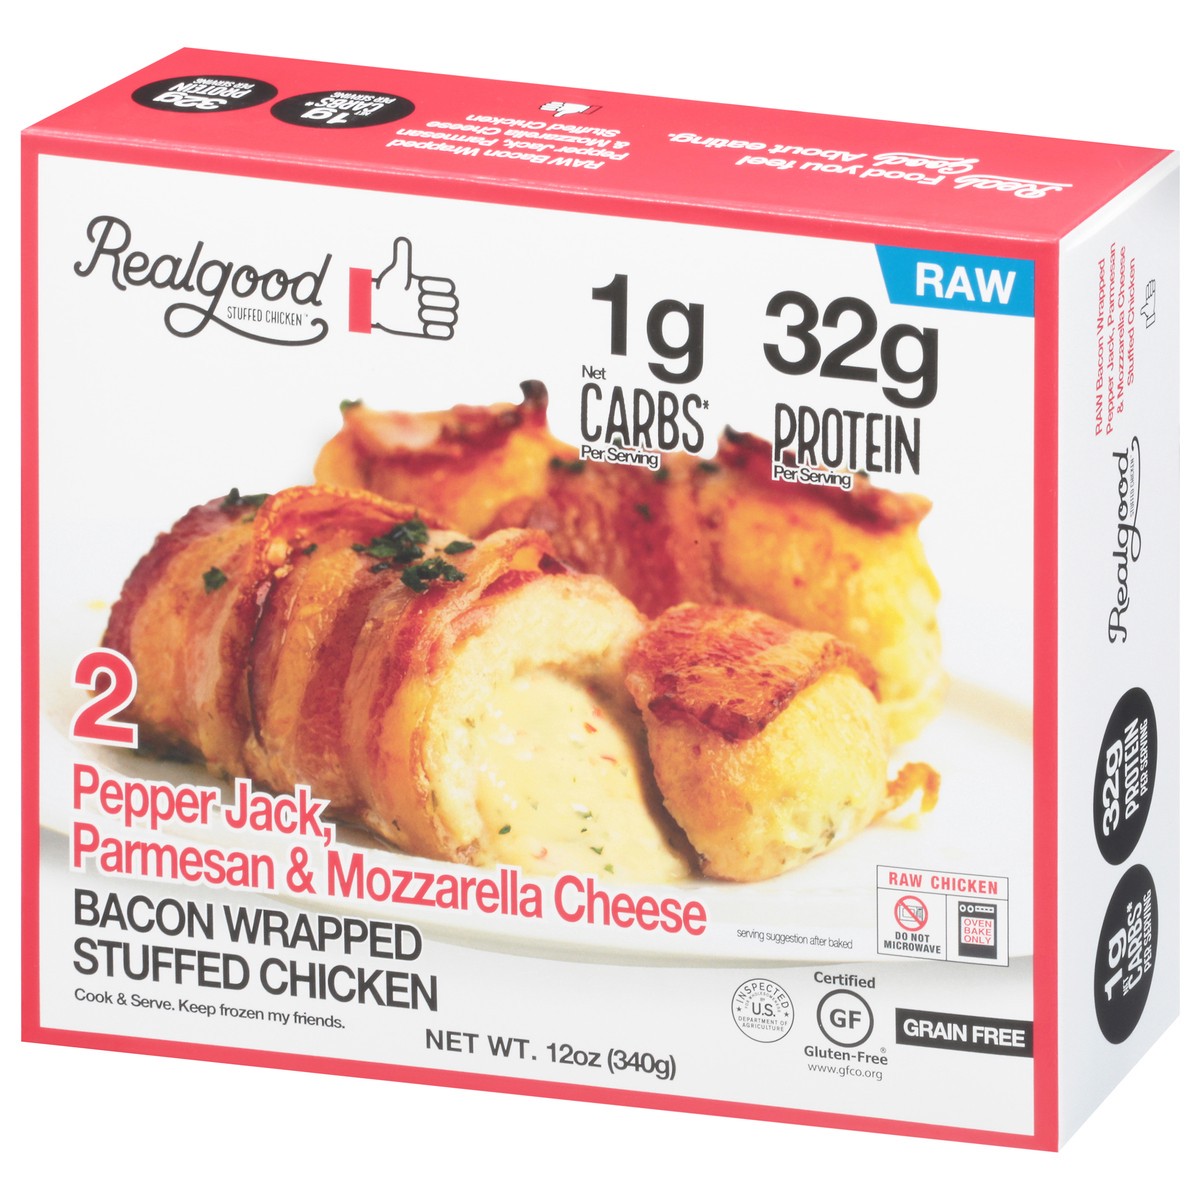 slide 8 of 13, Realgood Foods Co. Pepper Jack, Parmesan & Mozzarella Cheese Bacon Wrapped Stuffed Chicken 2 ea, 12 oz